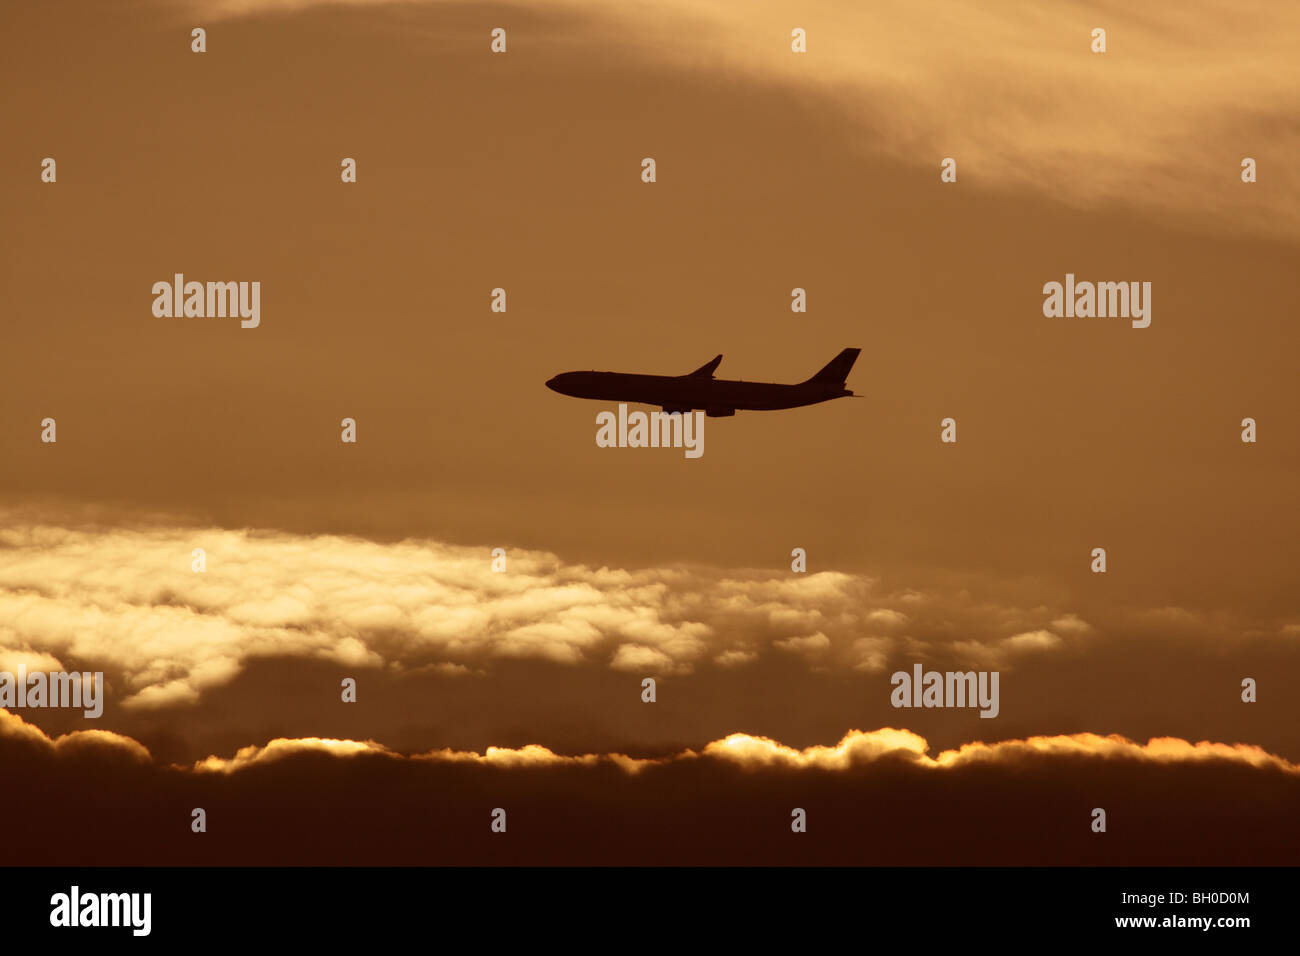 Air travel. Commercial passenger jet plane flying in the air against a cloudy sky at sunset. Silhouette of airplane in flight path. Civil aviation. Stock Photo